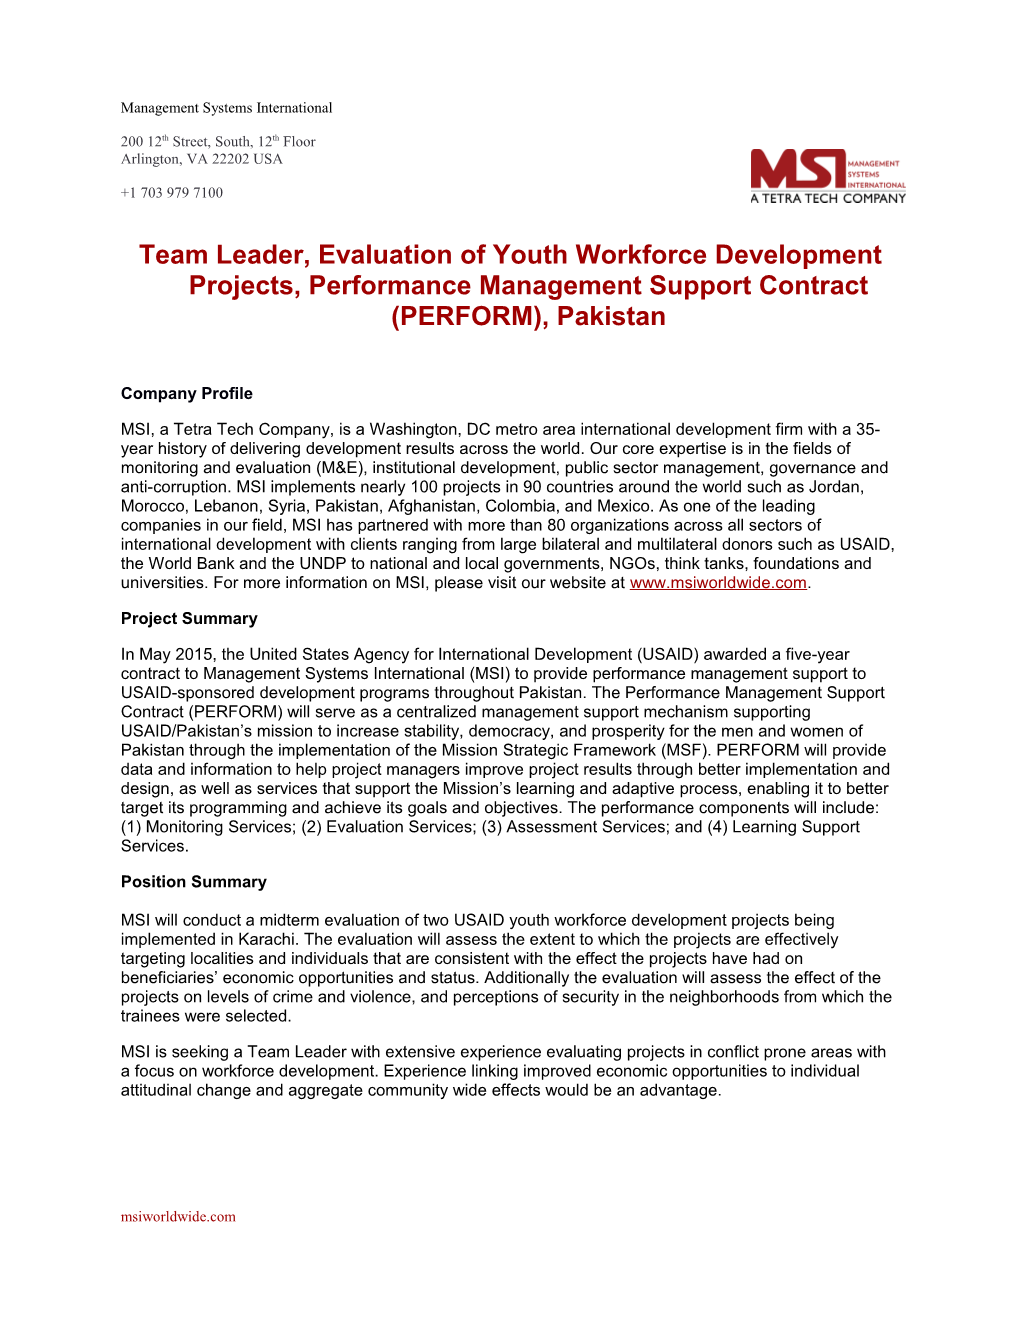 Team Leader, Evaluation of Youth Workforce Development Projects, Performance Management